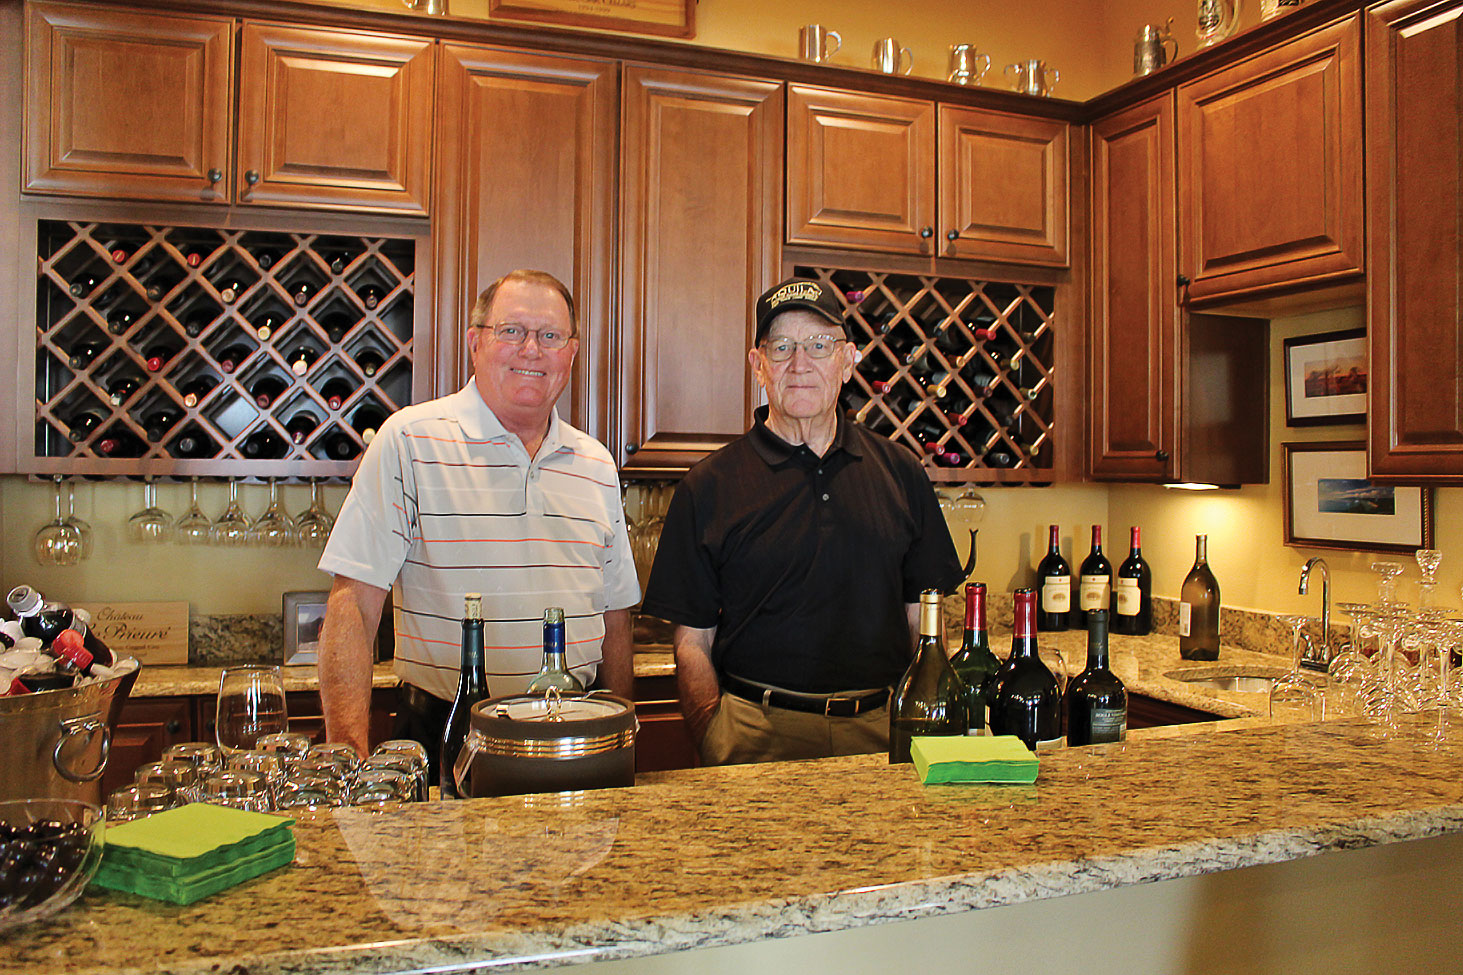 Our bartenders, Guy Bent and Jerry Phillips